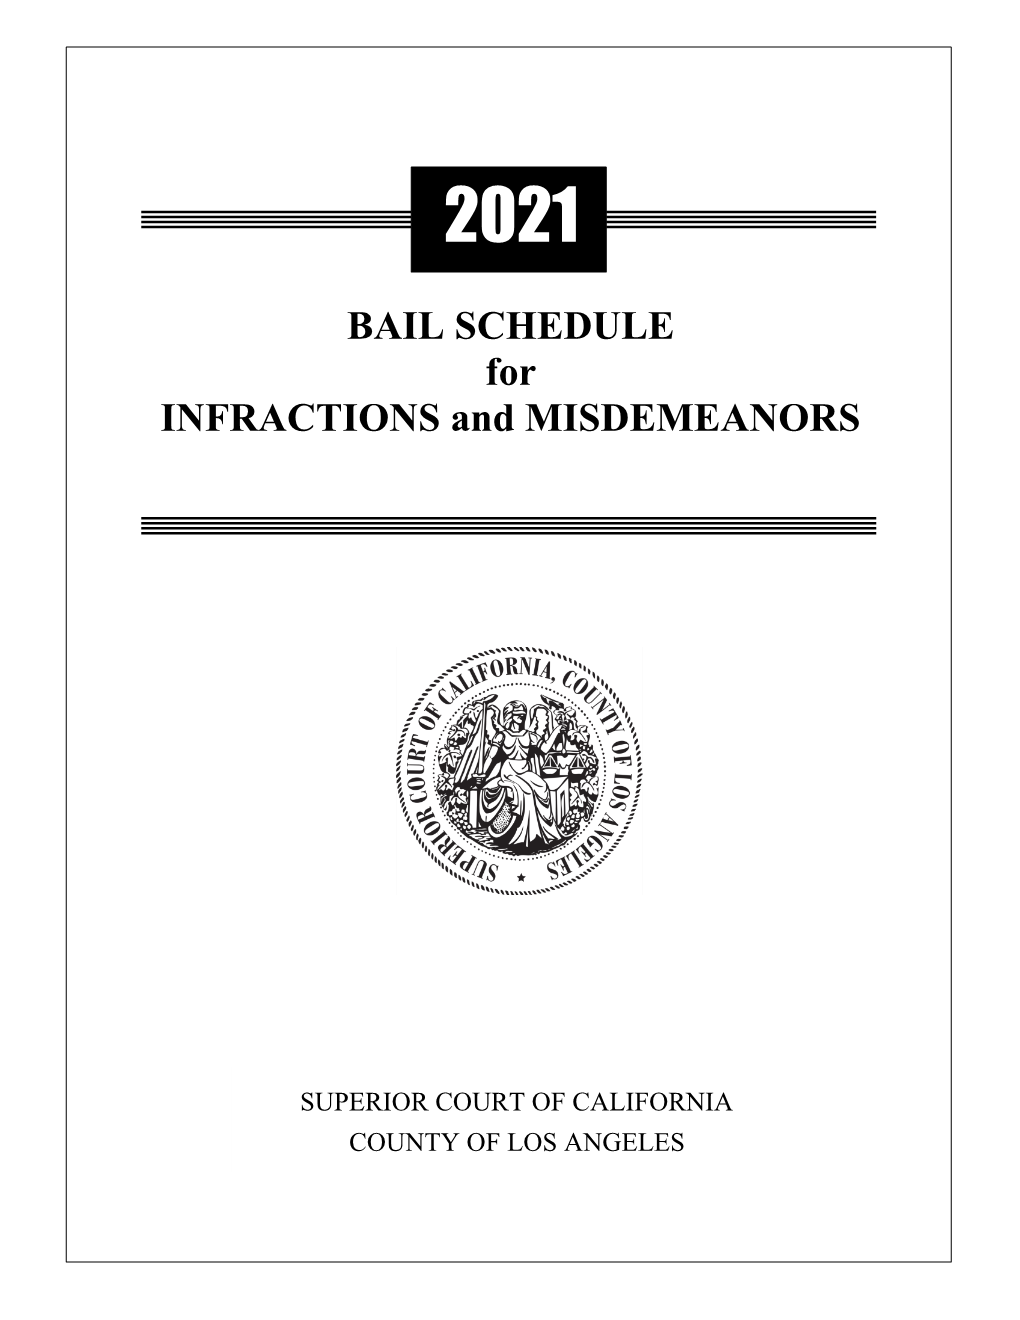 BAIL SCHEDULE for INFRACTIONS and MISDEMEANORS